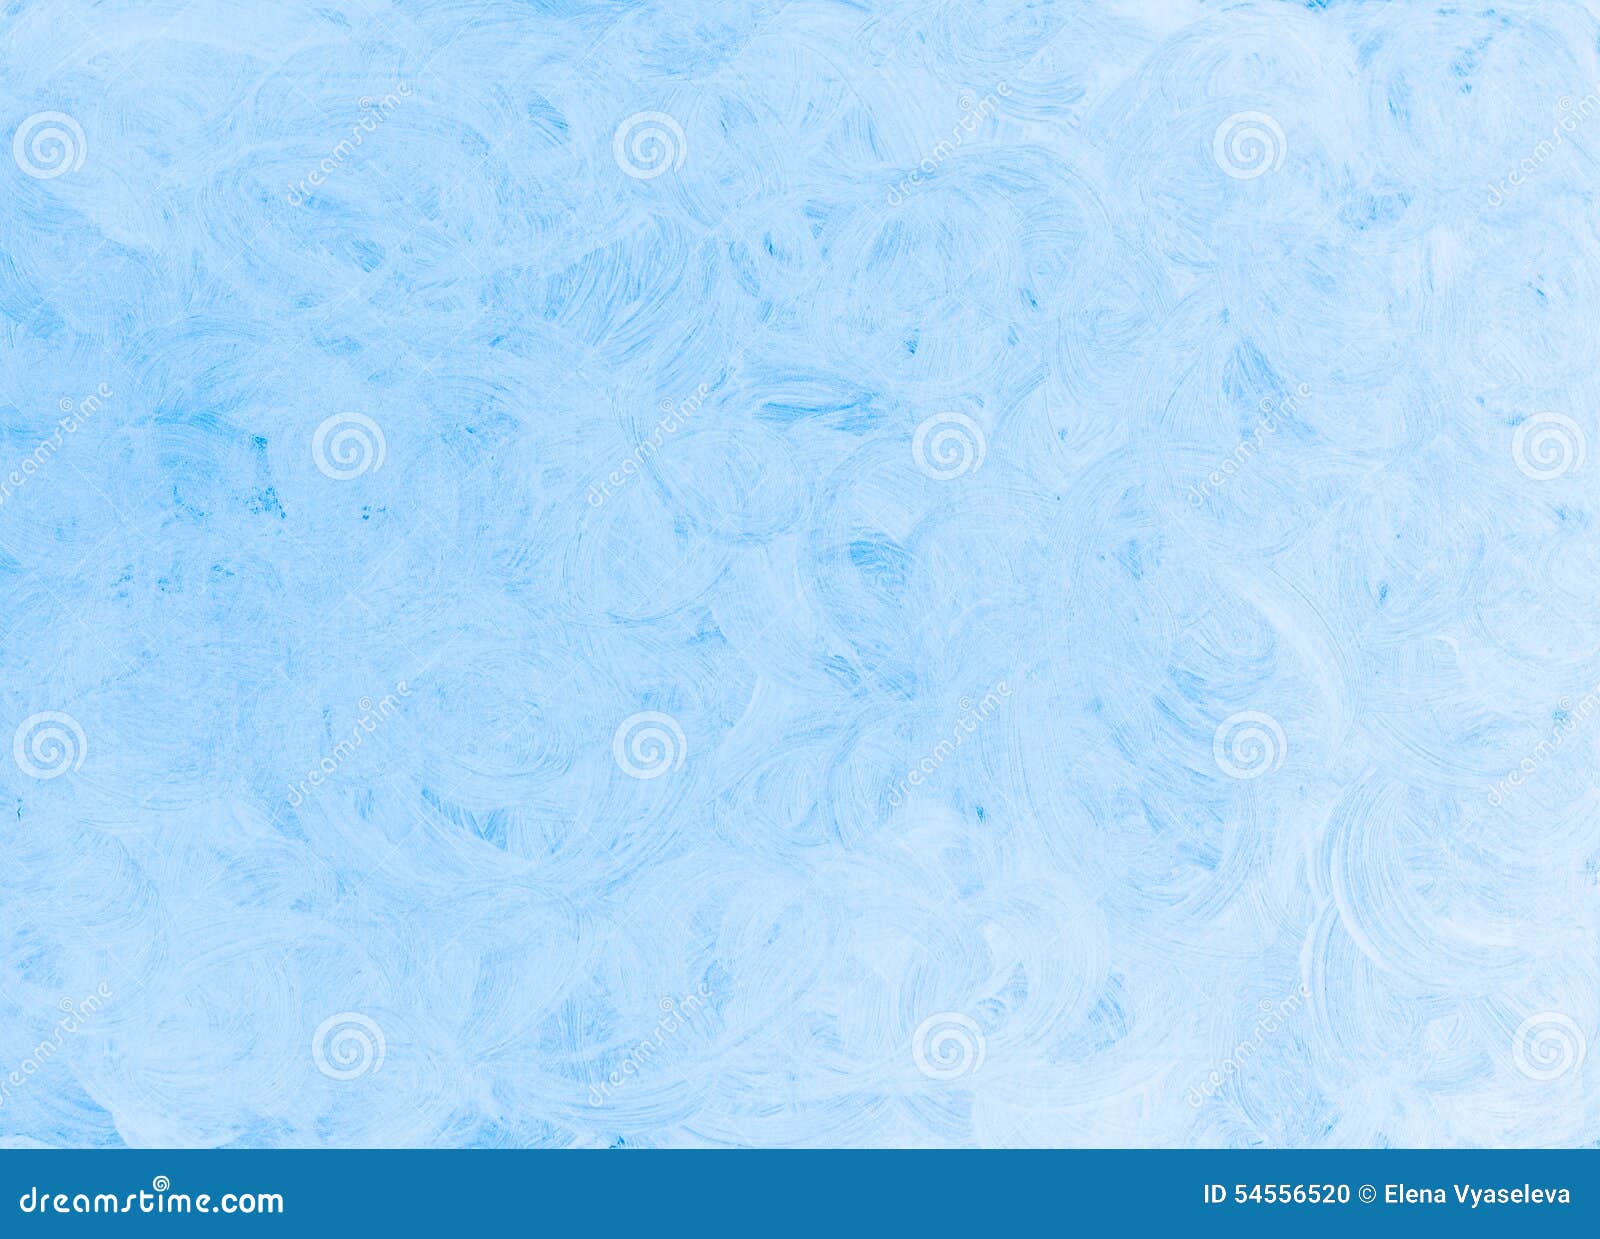 Download 470+ Background Abstract Sky Blue Paling Keren